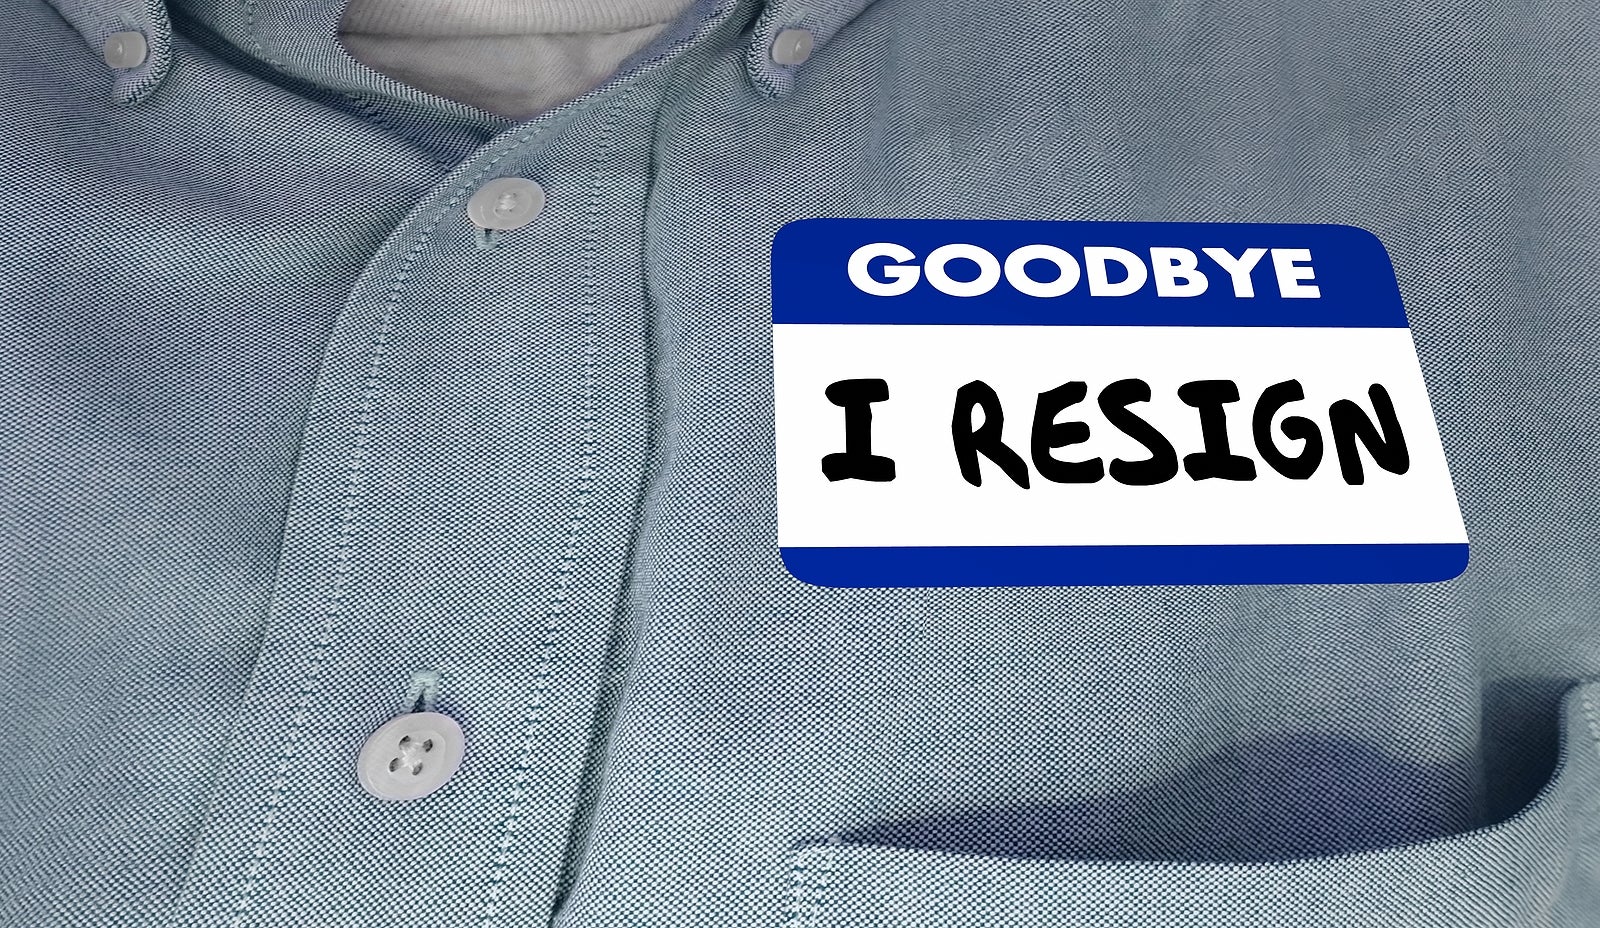 The Great Resignation: What’s In Store For Your Business